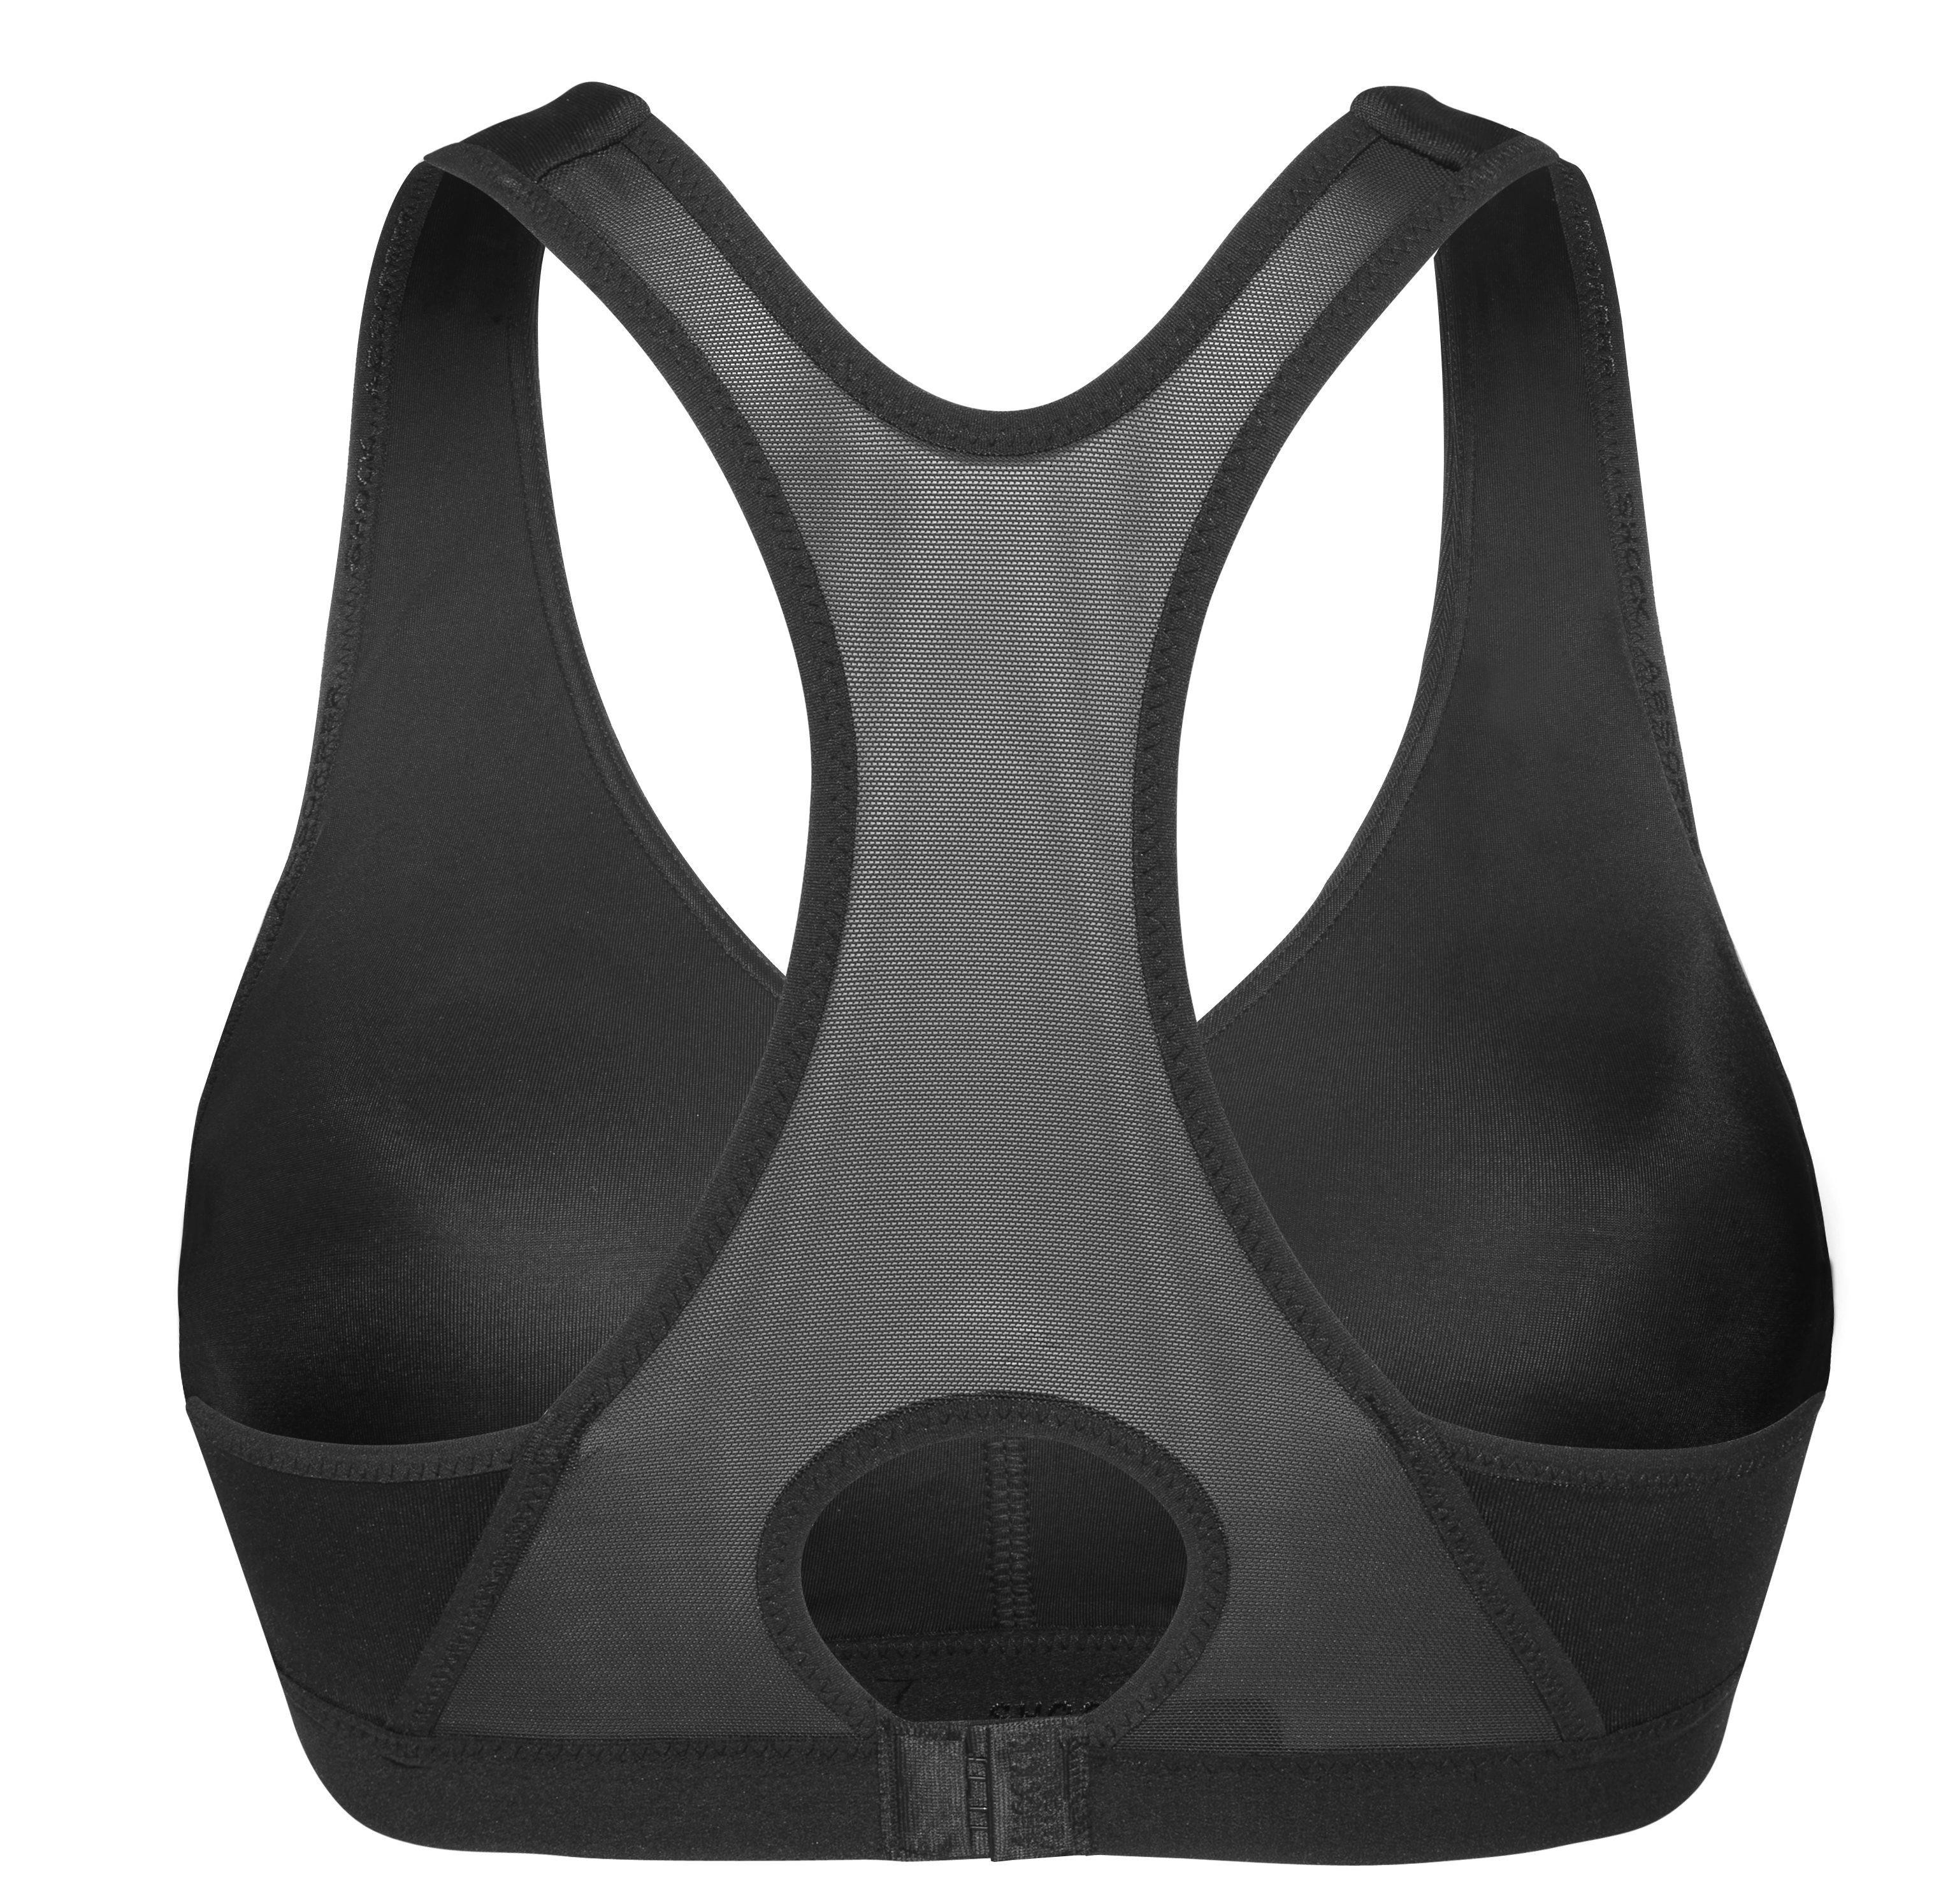 Obscure Revival - Padded Sports Bra: Removable Padding, Scoop